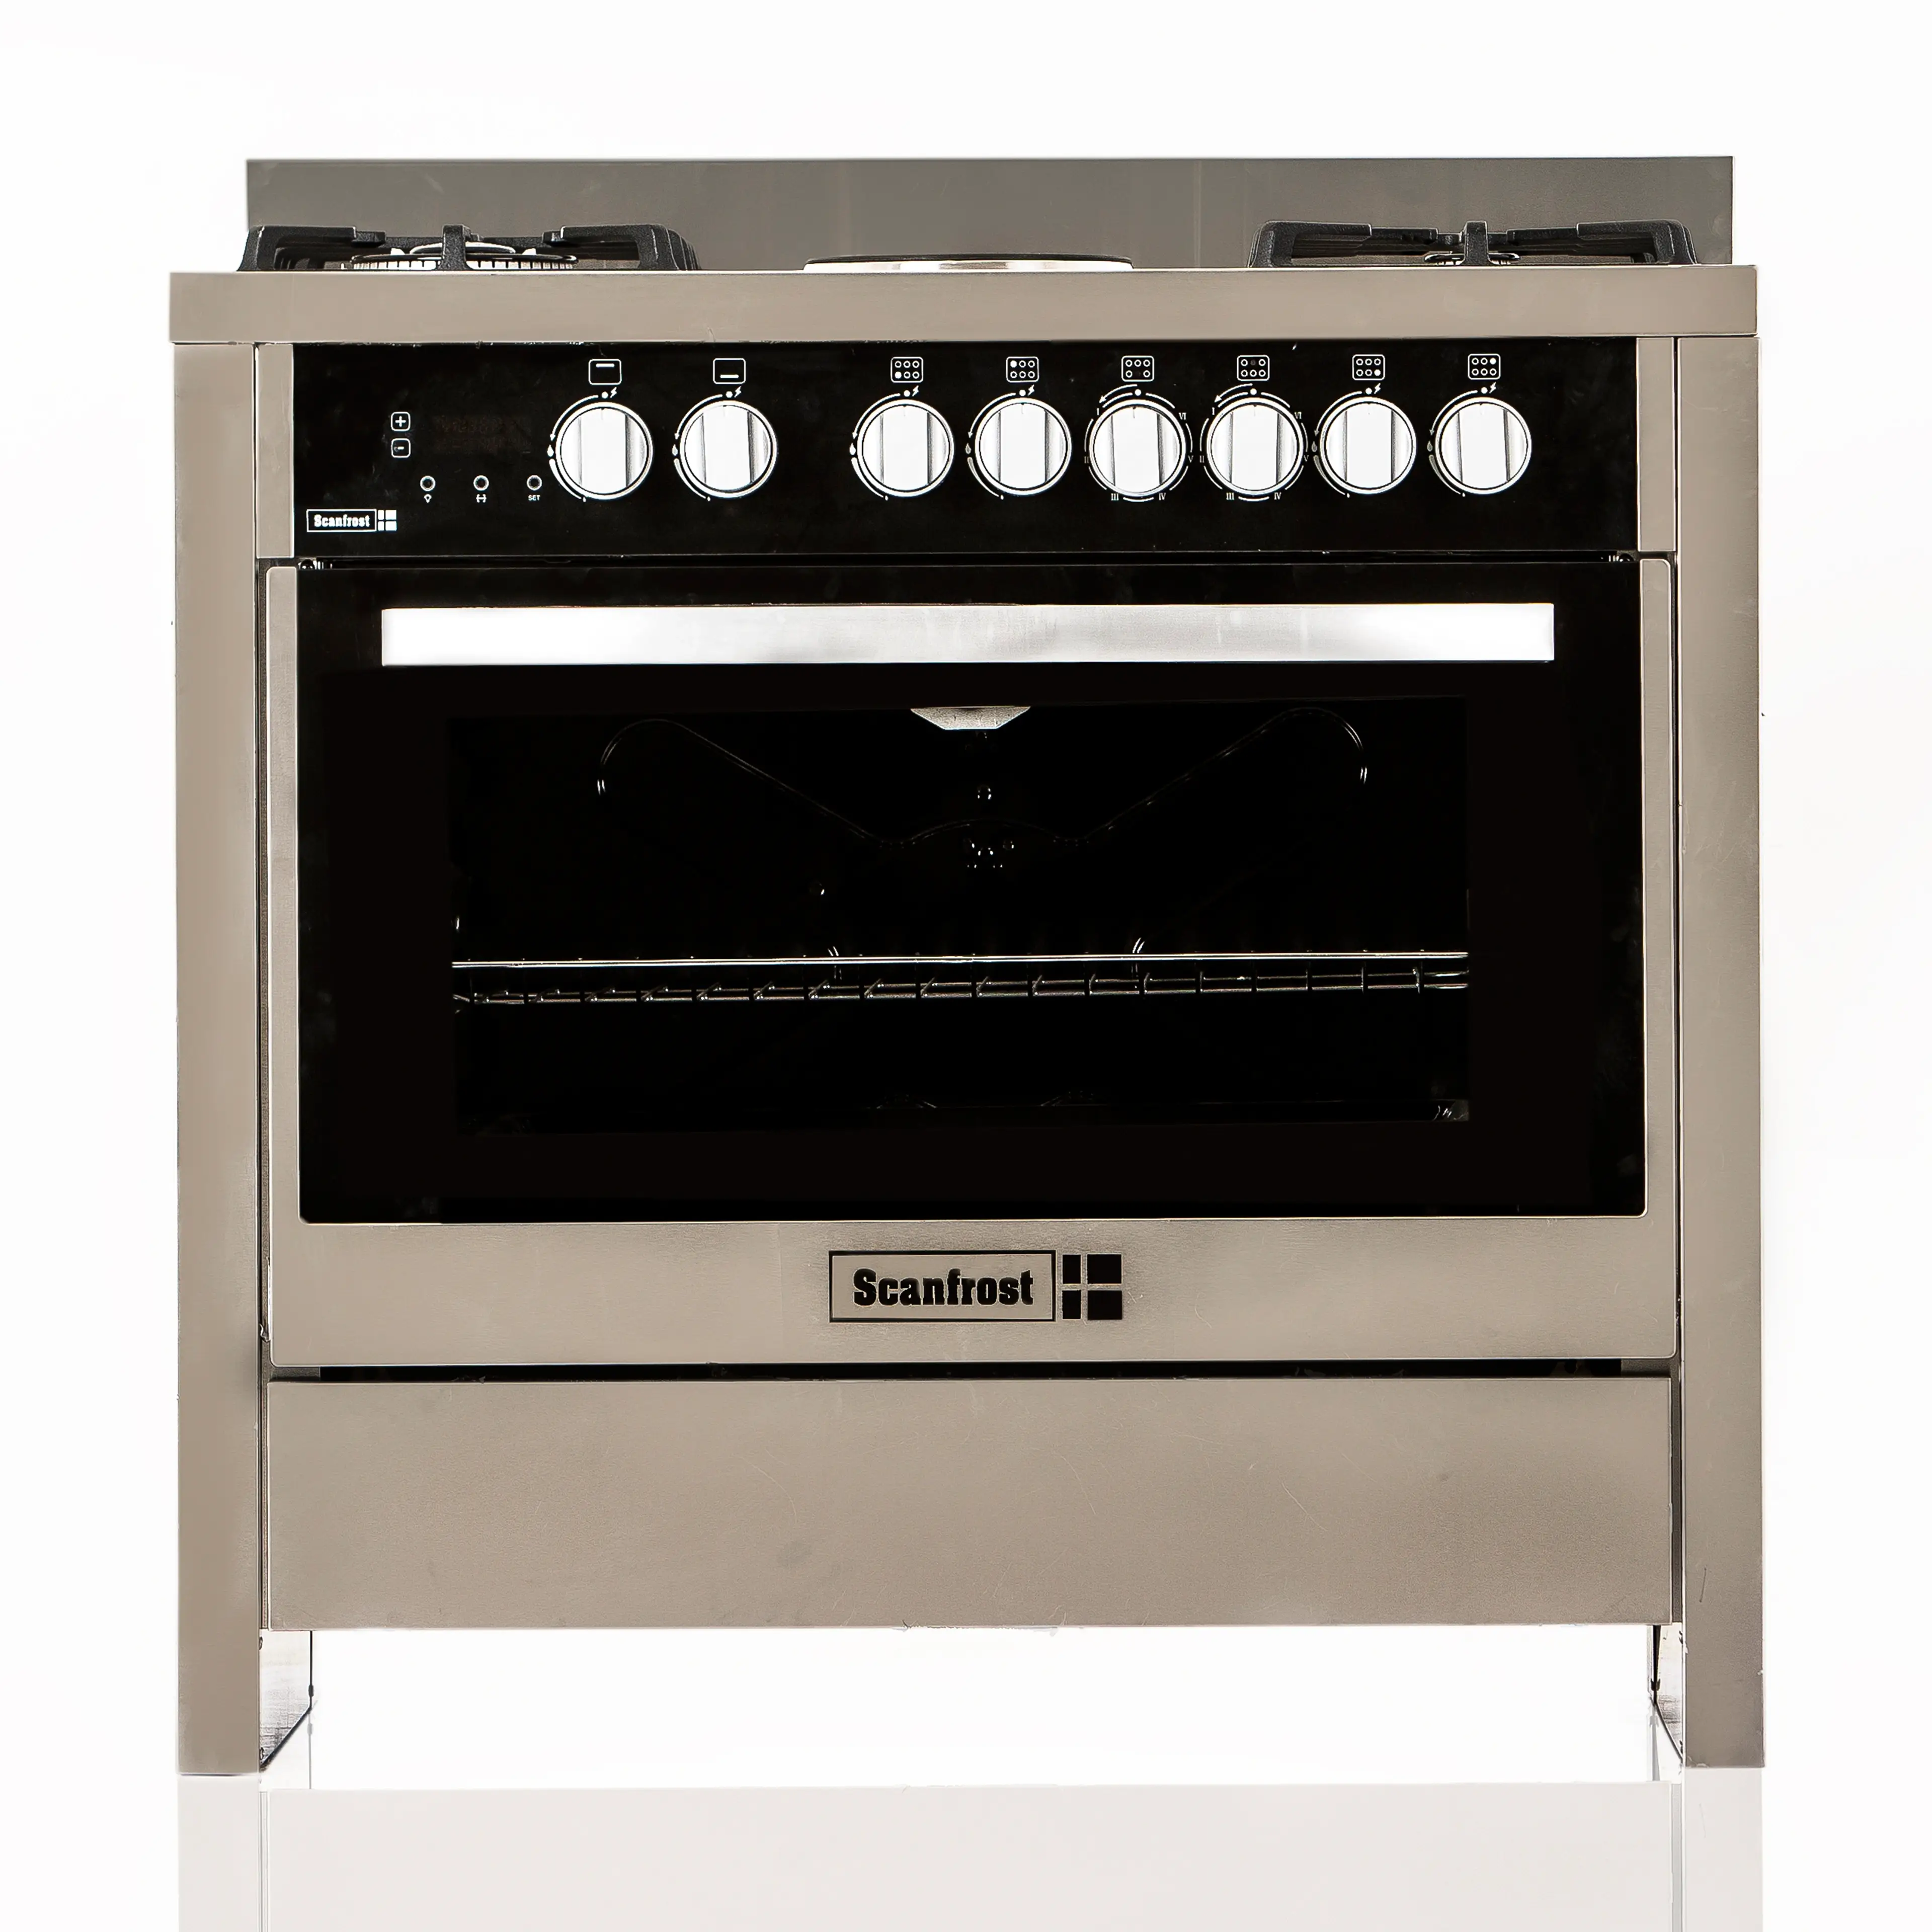 SCANFROST GAS COOKER 60X90 5B STAINLESS STEEL